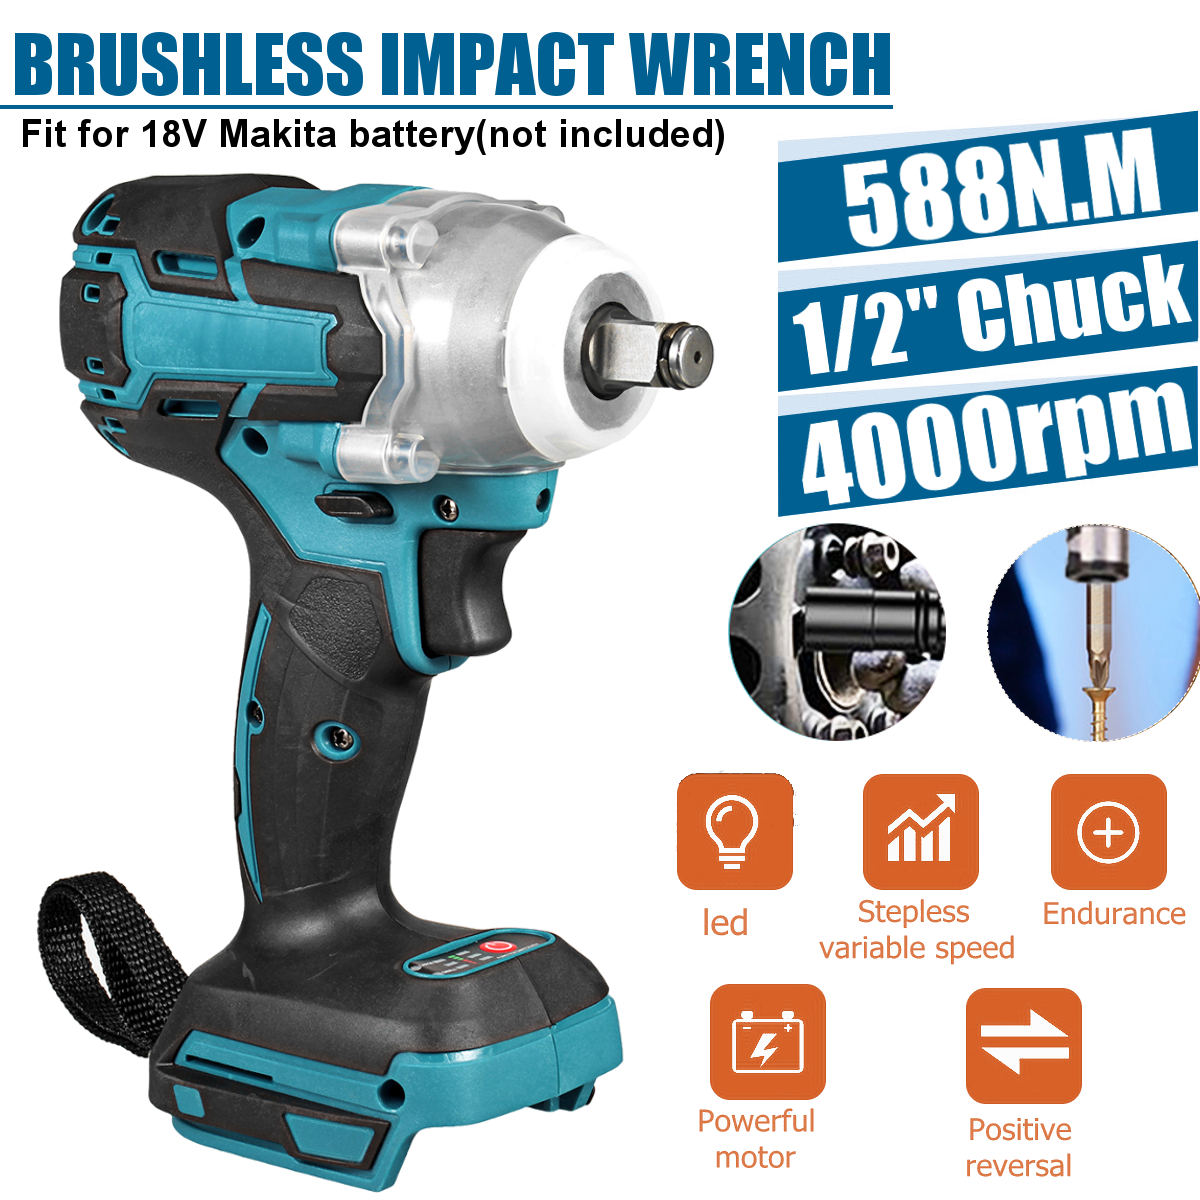 588Nm-Cordless-Brushless-Wrench12-Impact-Wrench-Driver-Replacement-for-Makita-18V-Battery-1856002-7